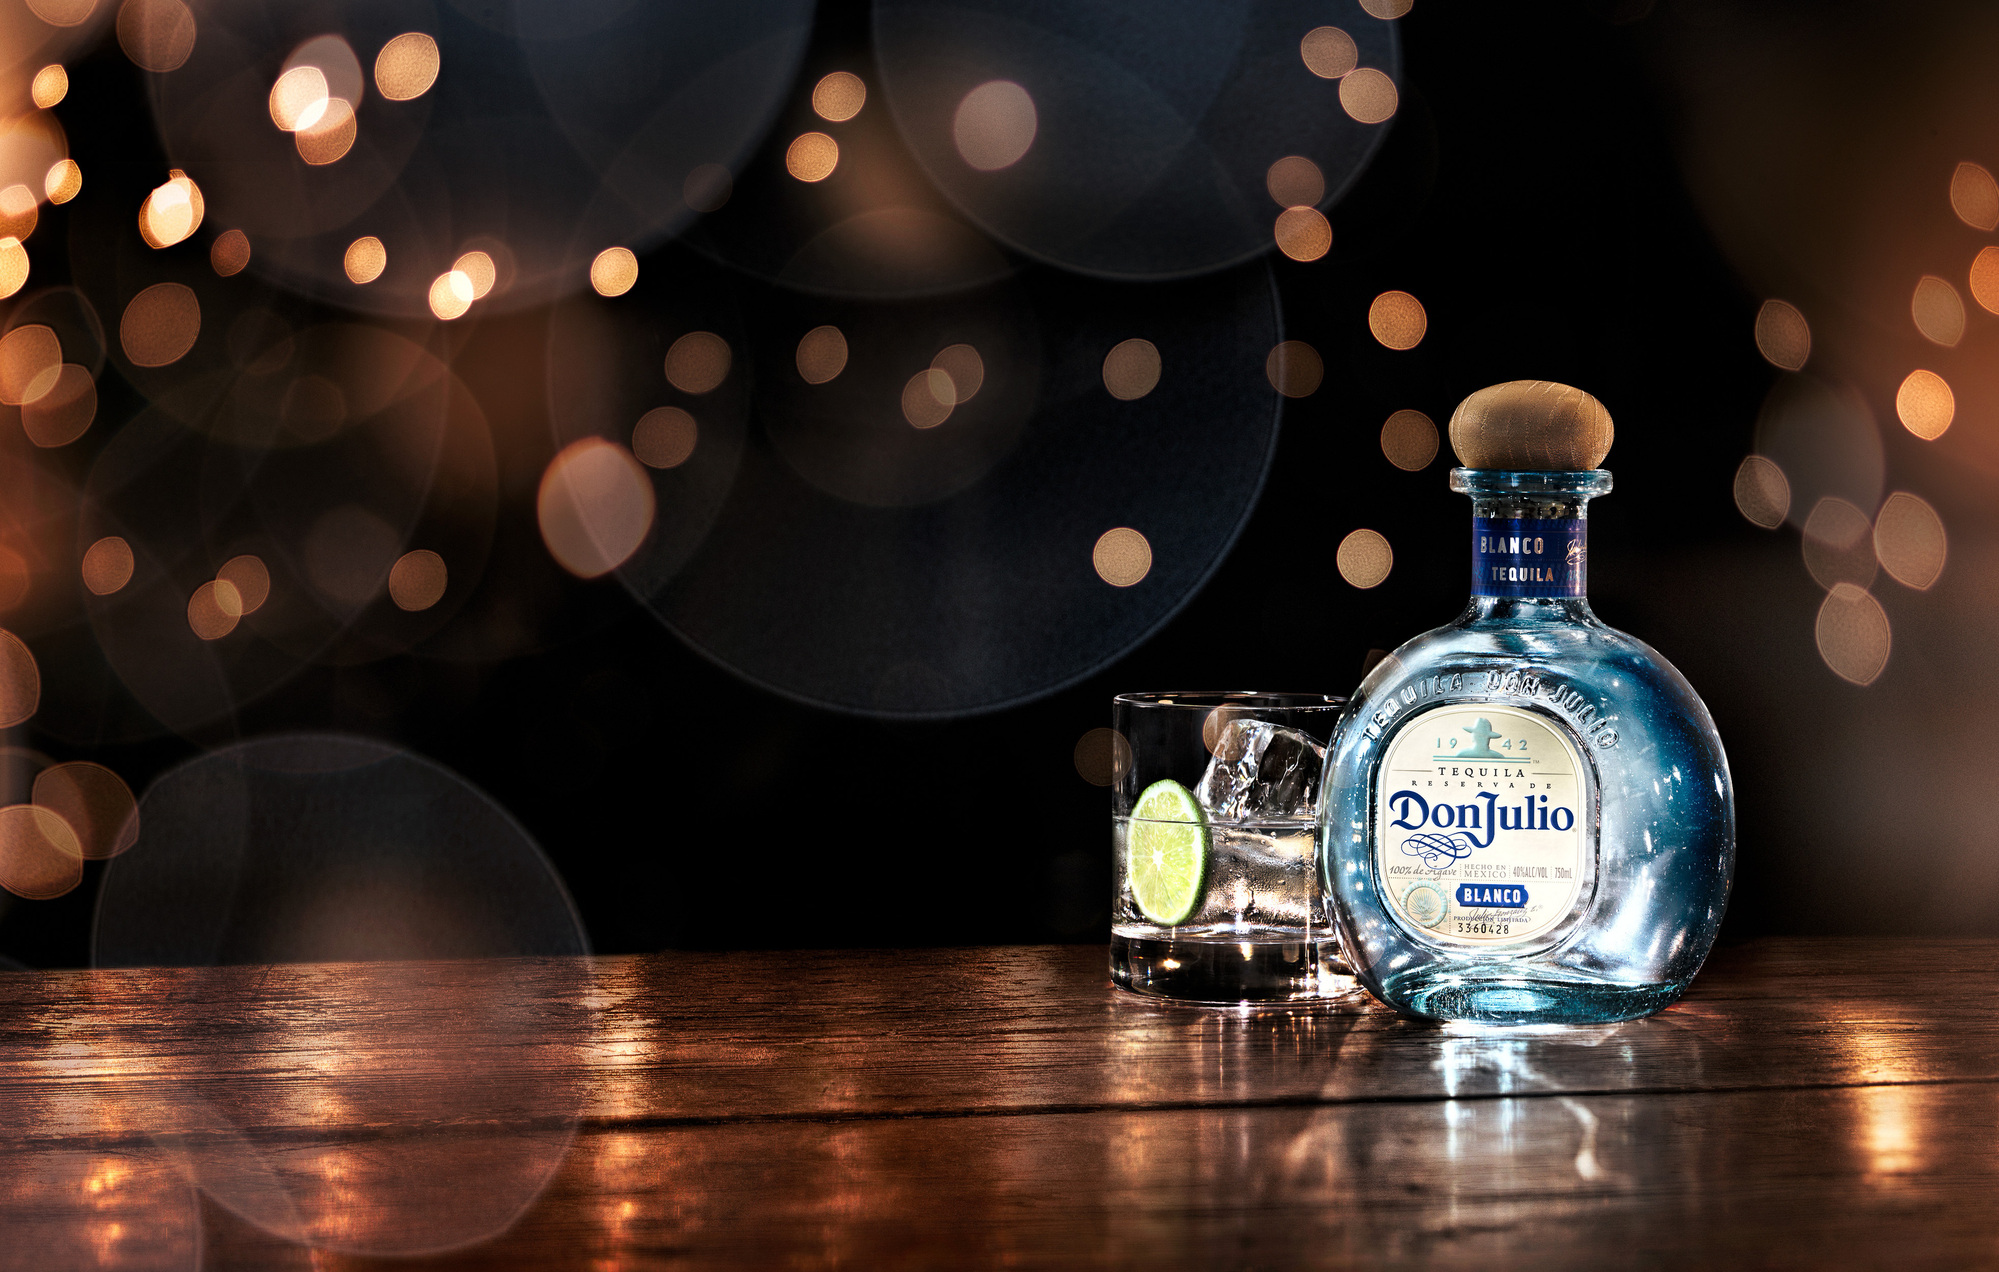 Don Julio Tequila blanco lights. Beverages and liquids product & advertising photography by Timothy Hogan Studio in Los Angeles